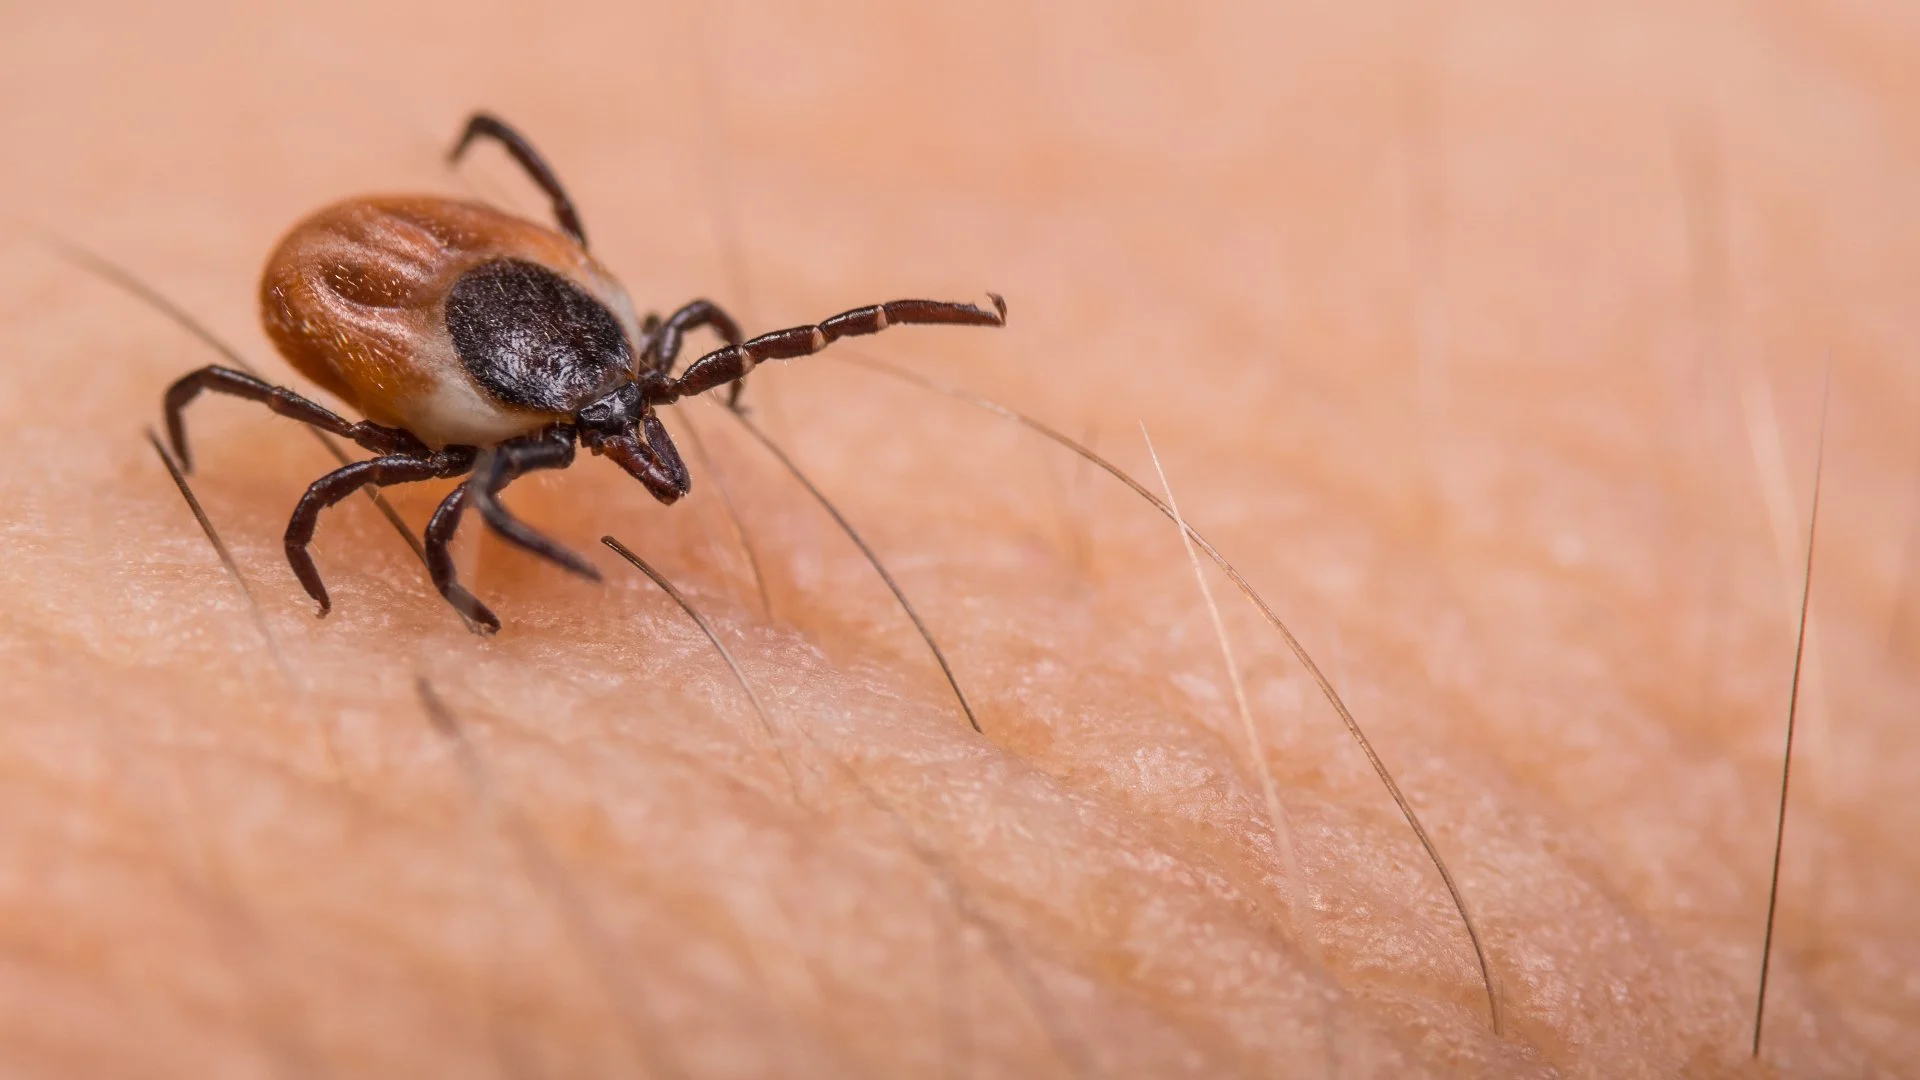 Stay Alert: Ticks Are an Expanding Concern in Ohio